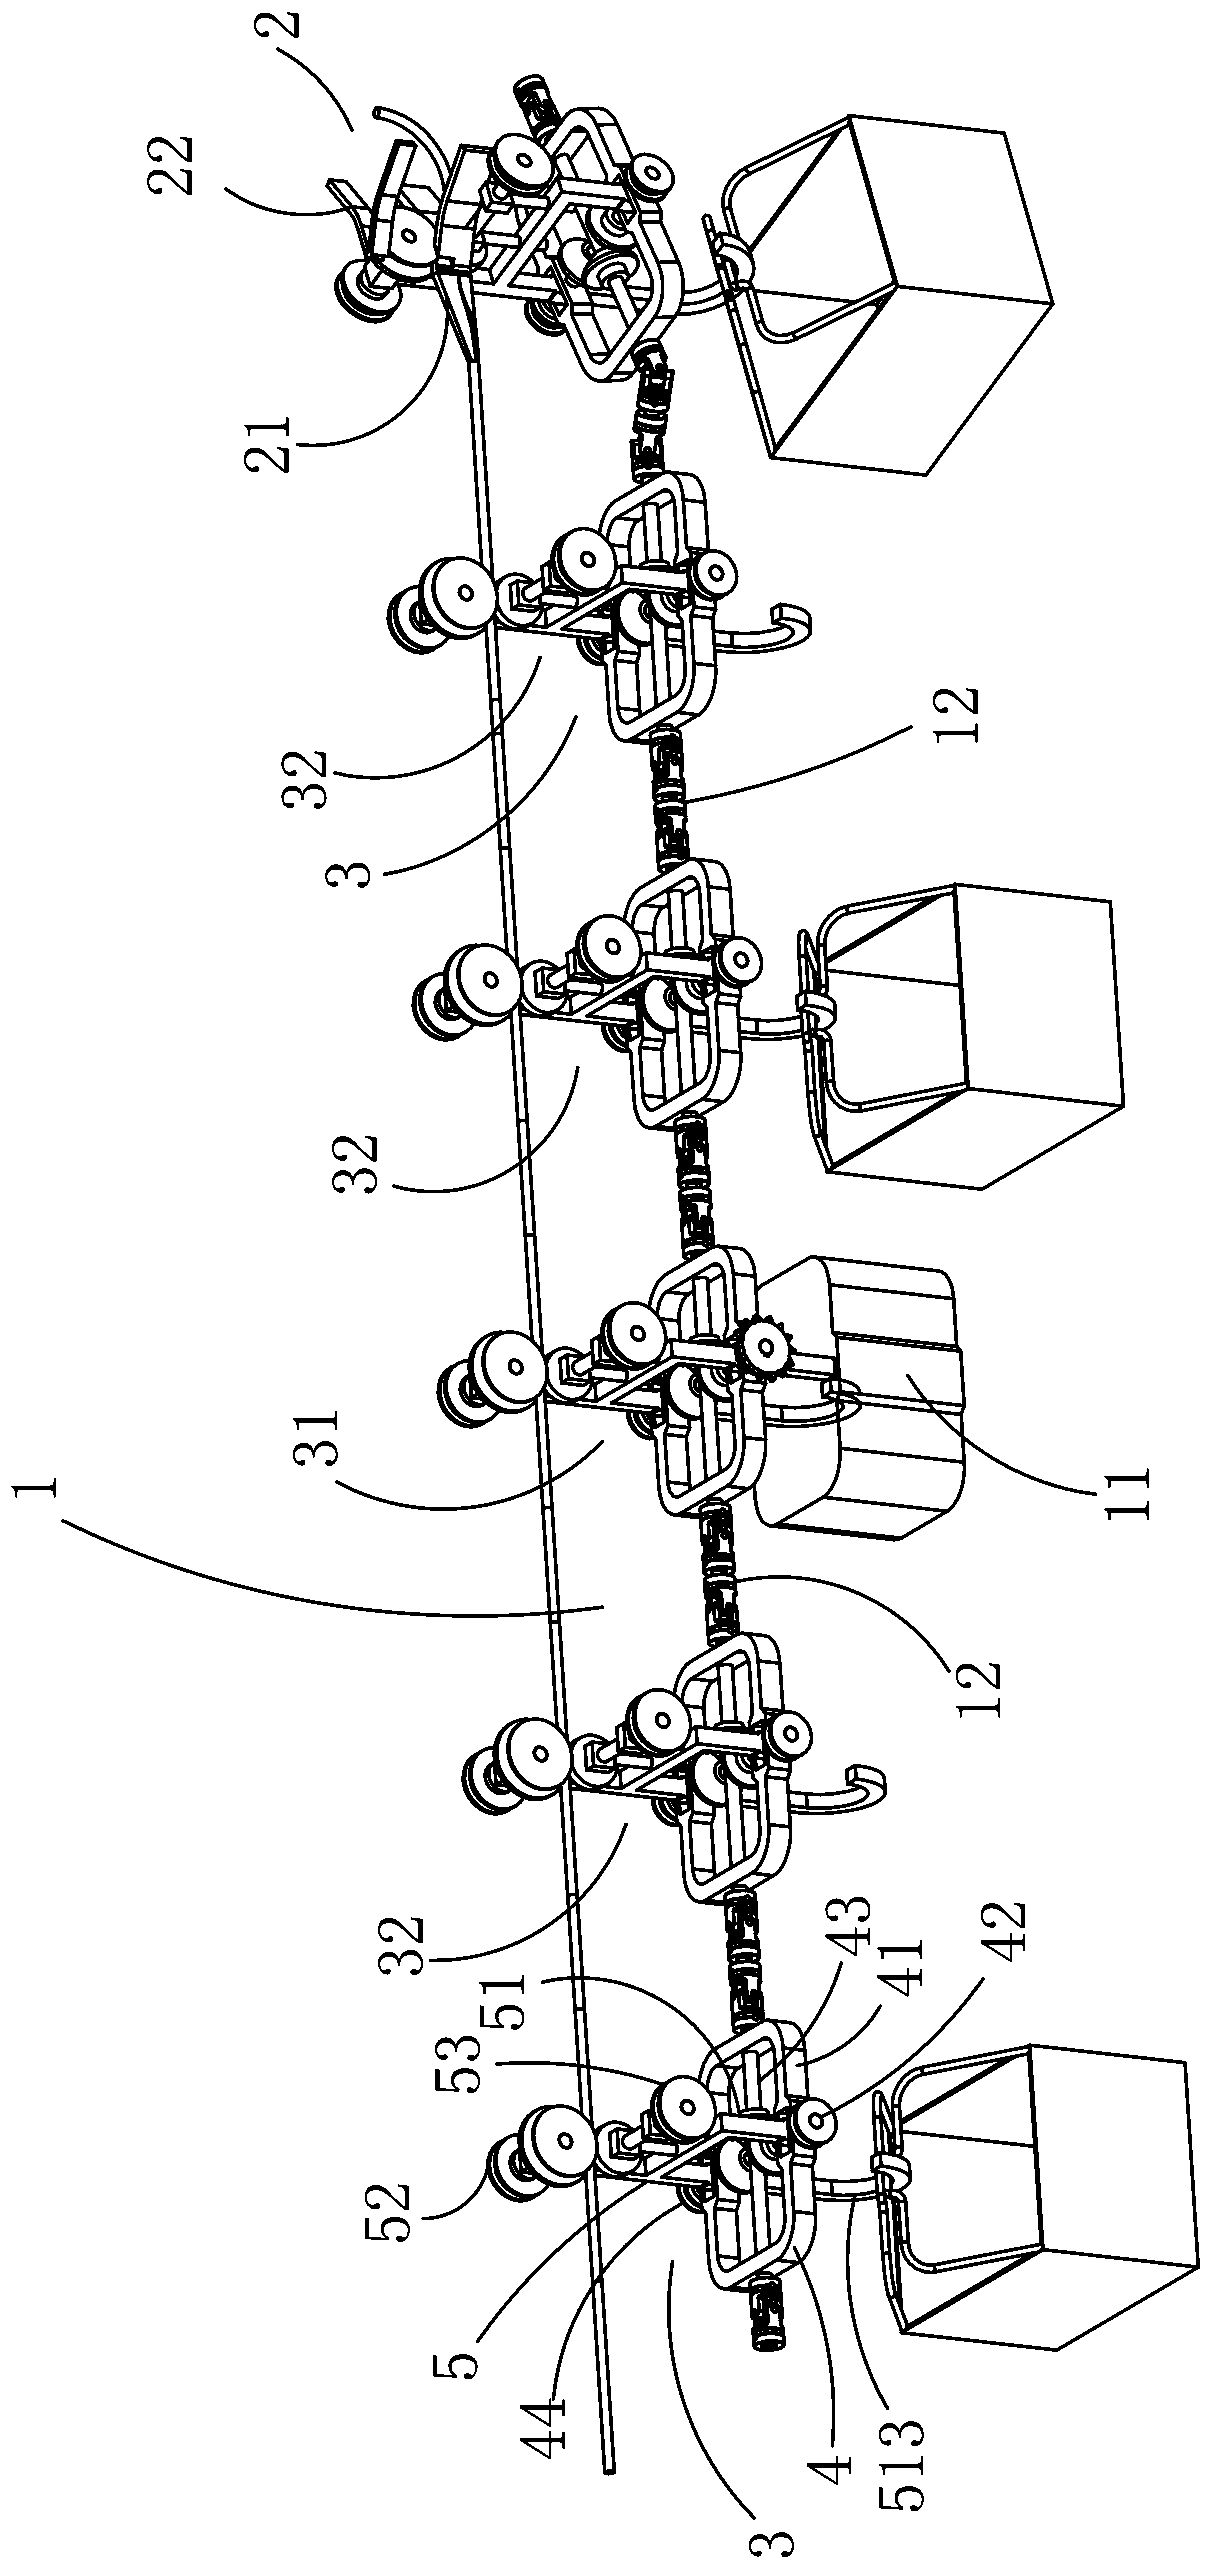 Cableway self-propelled transport apparatus